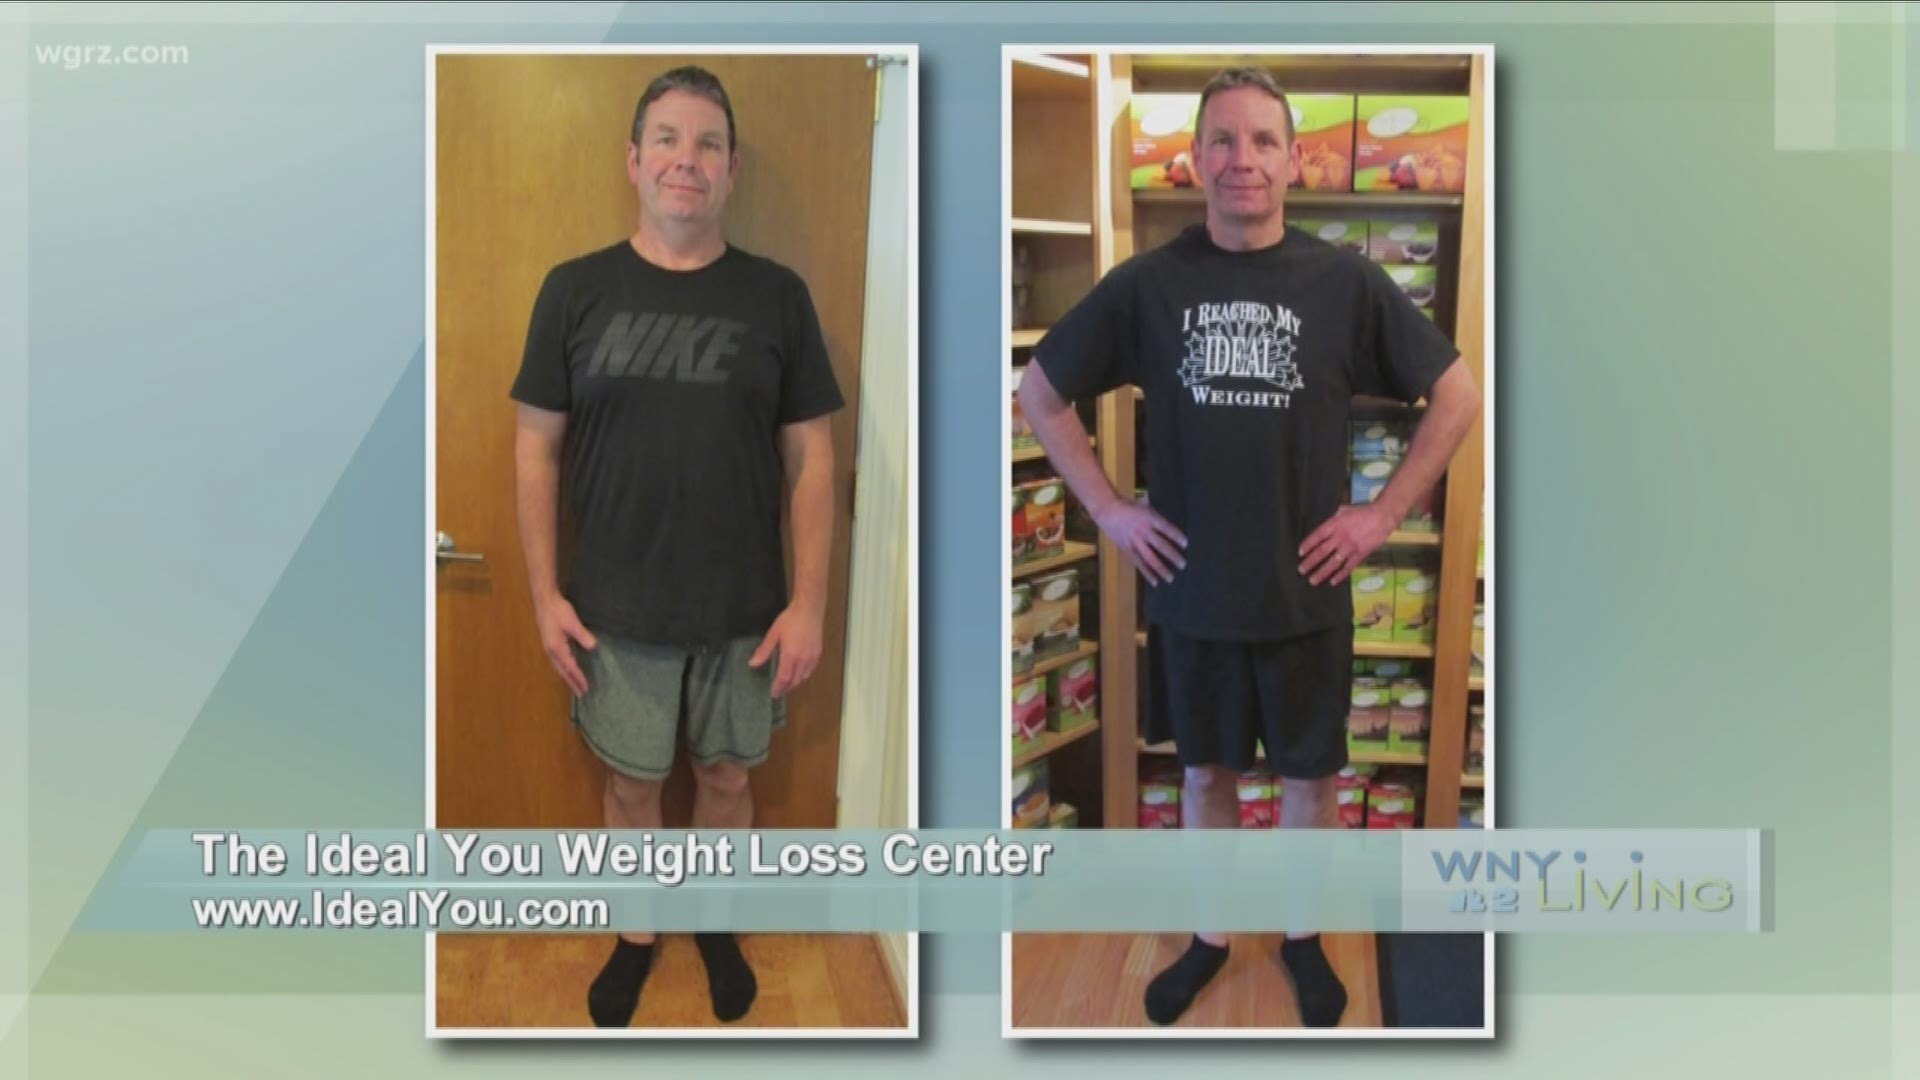 WNY Living - June 30 - The Ideal You Weight Loss Center